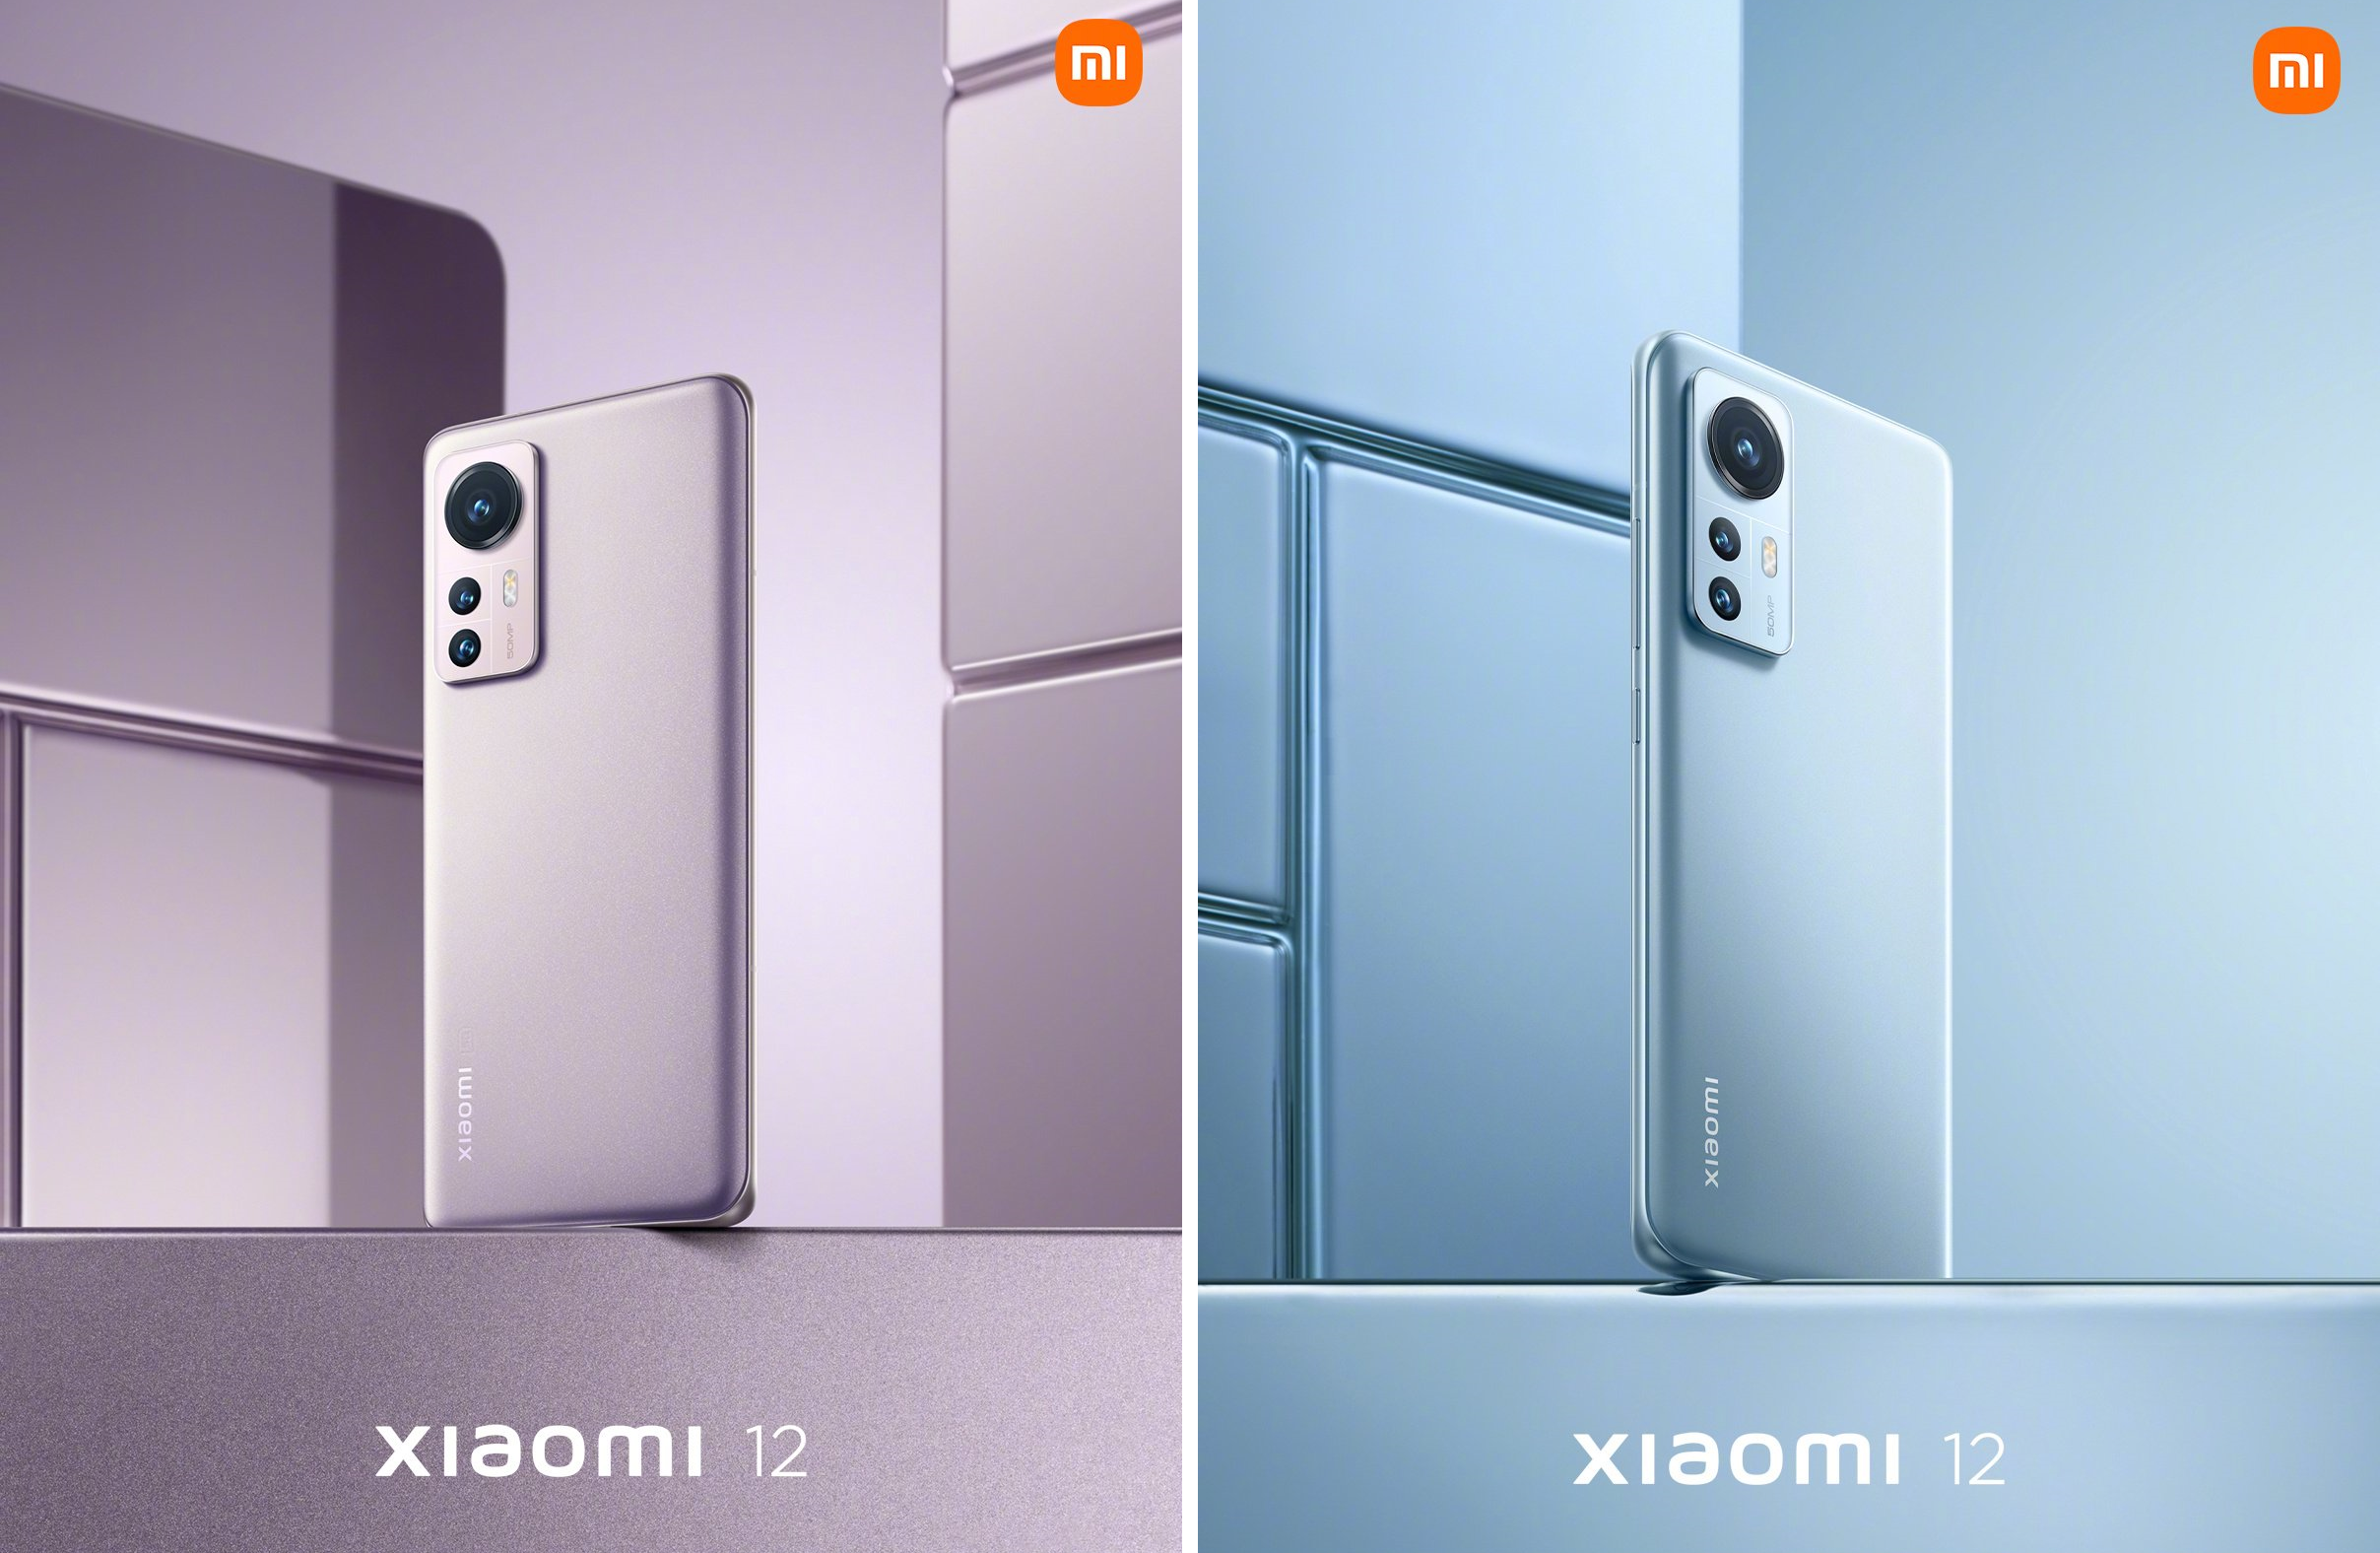 Xiaomi 12 - Snapdragon 8 Gen1, 50MP camera, 120Hz AMOLED display and 4500mAh battery for $580